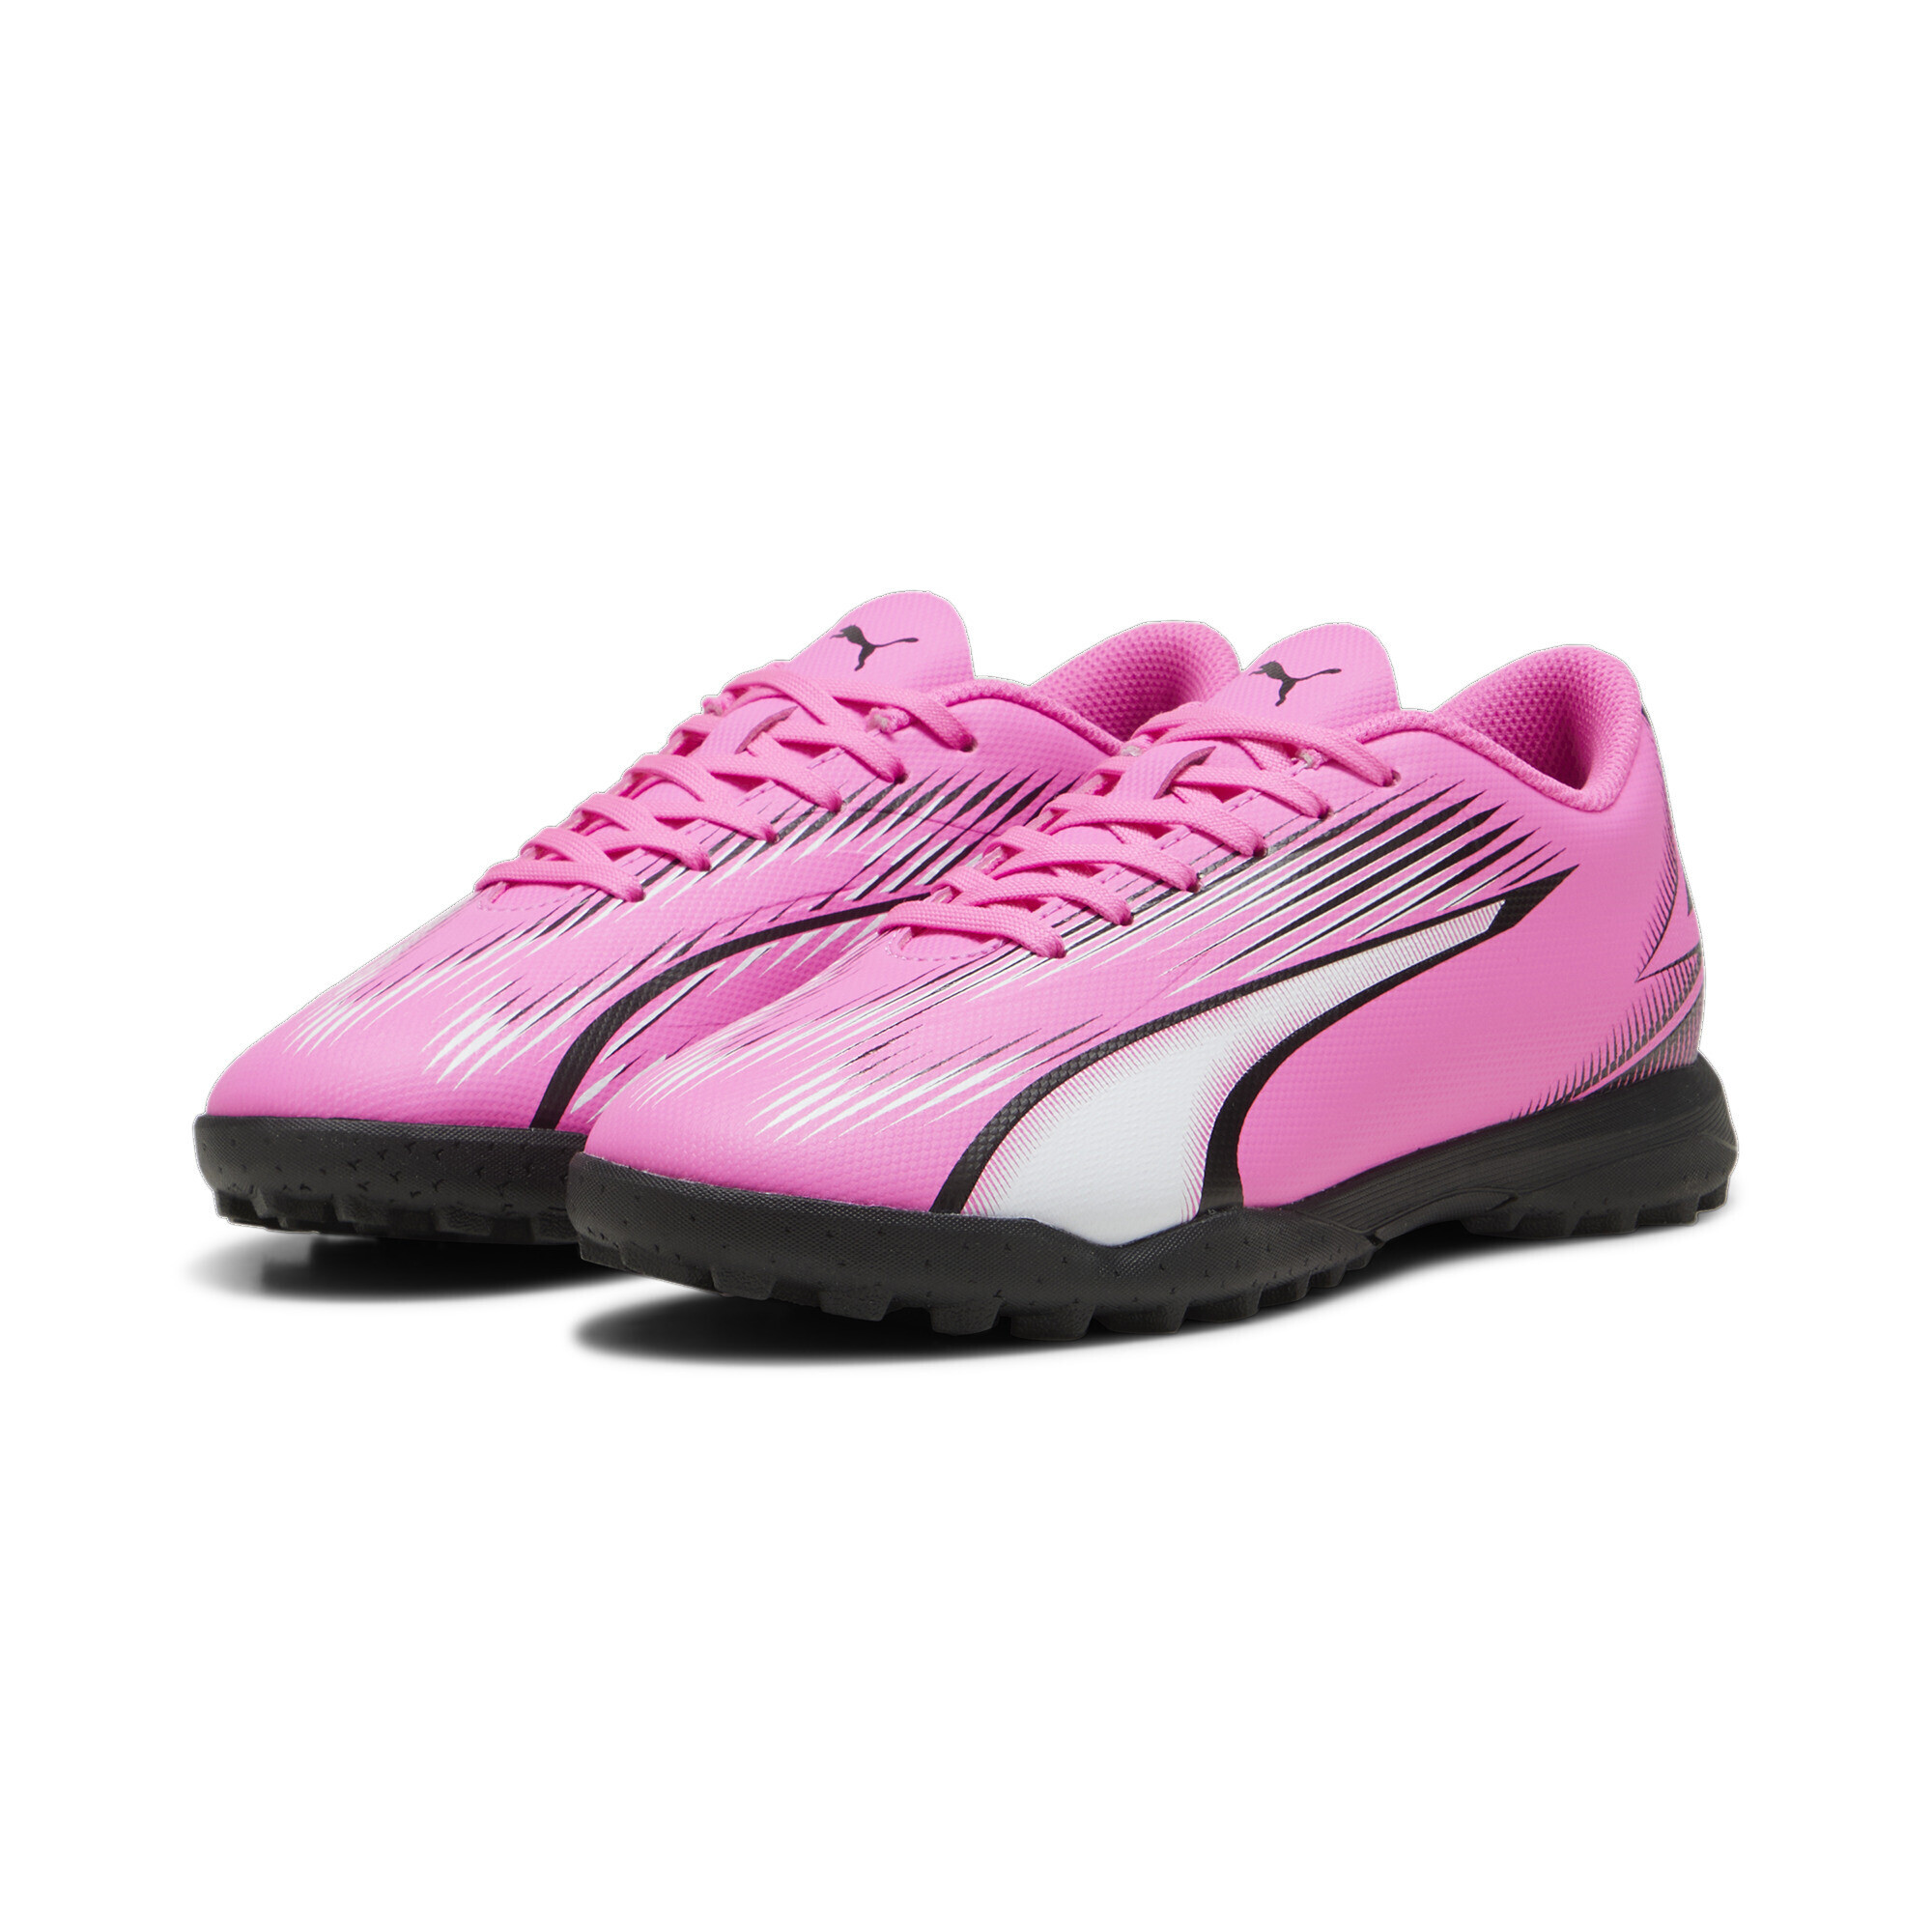 PUMA ULTRA PLAY TT Youth Football Boots In Pink, Size EU 36